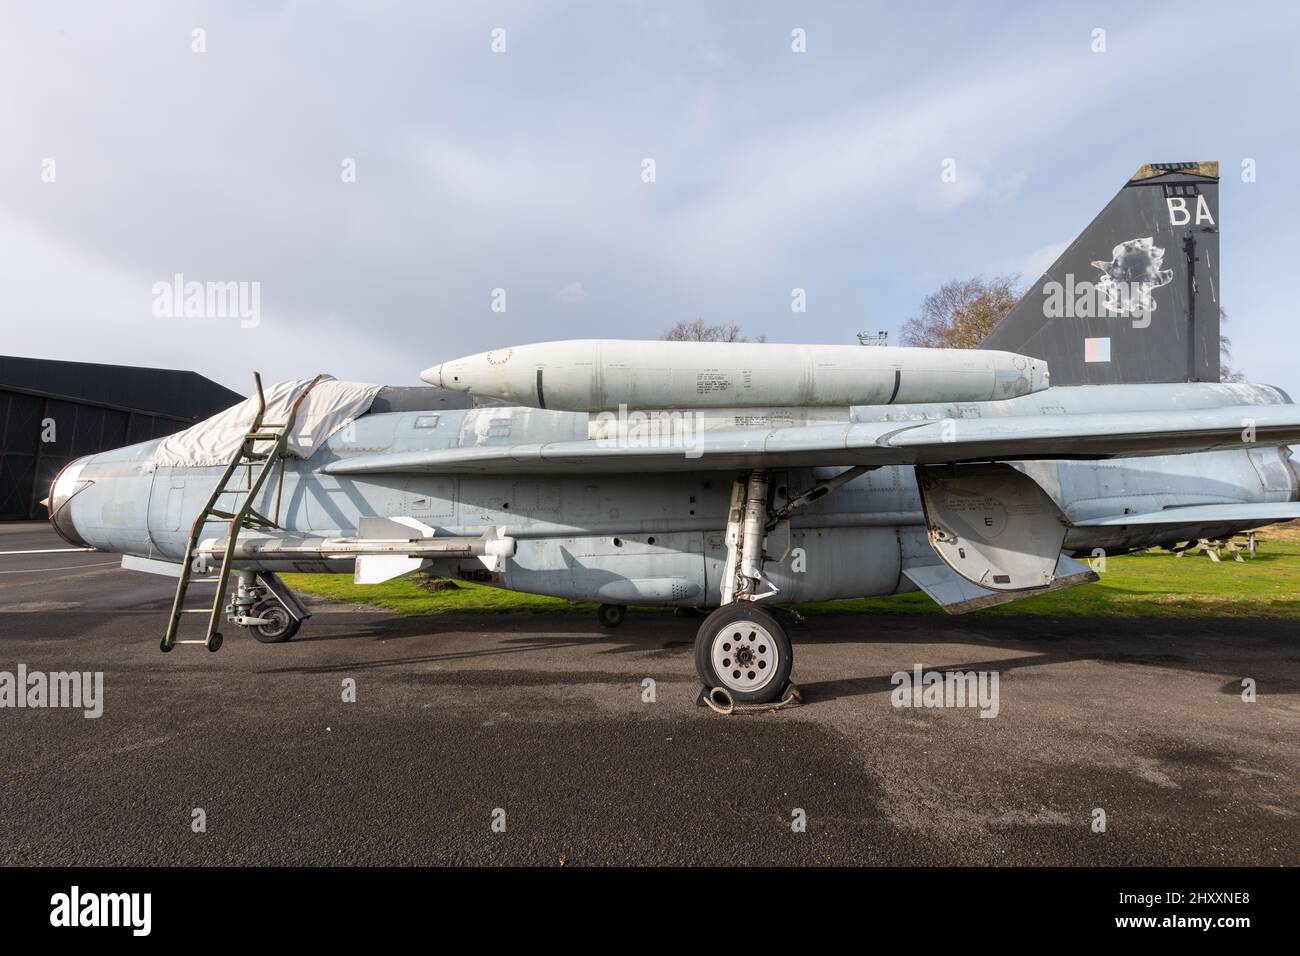 York.Yorkshire.United Kingdom.February 16th 2022.A Lightning F6 fighter plane is on display at the Yorkshire air museum Stock Photo